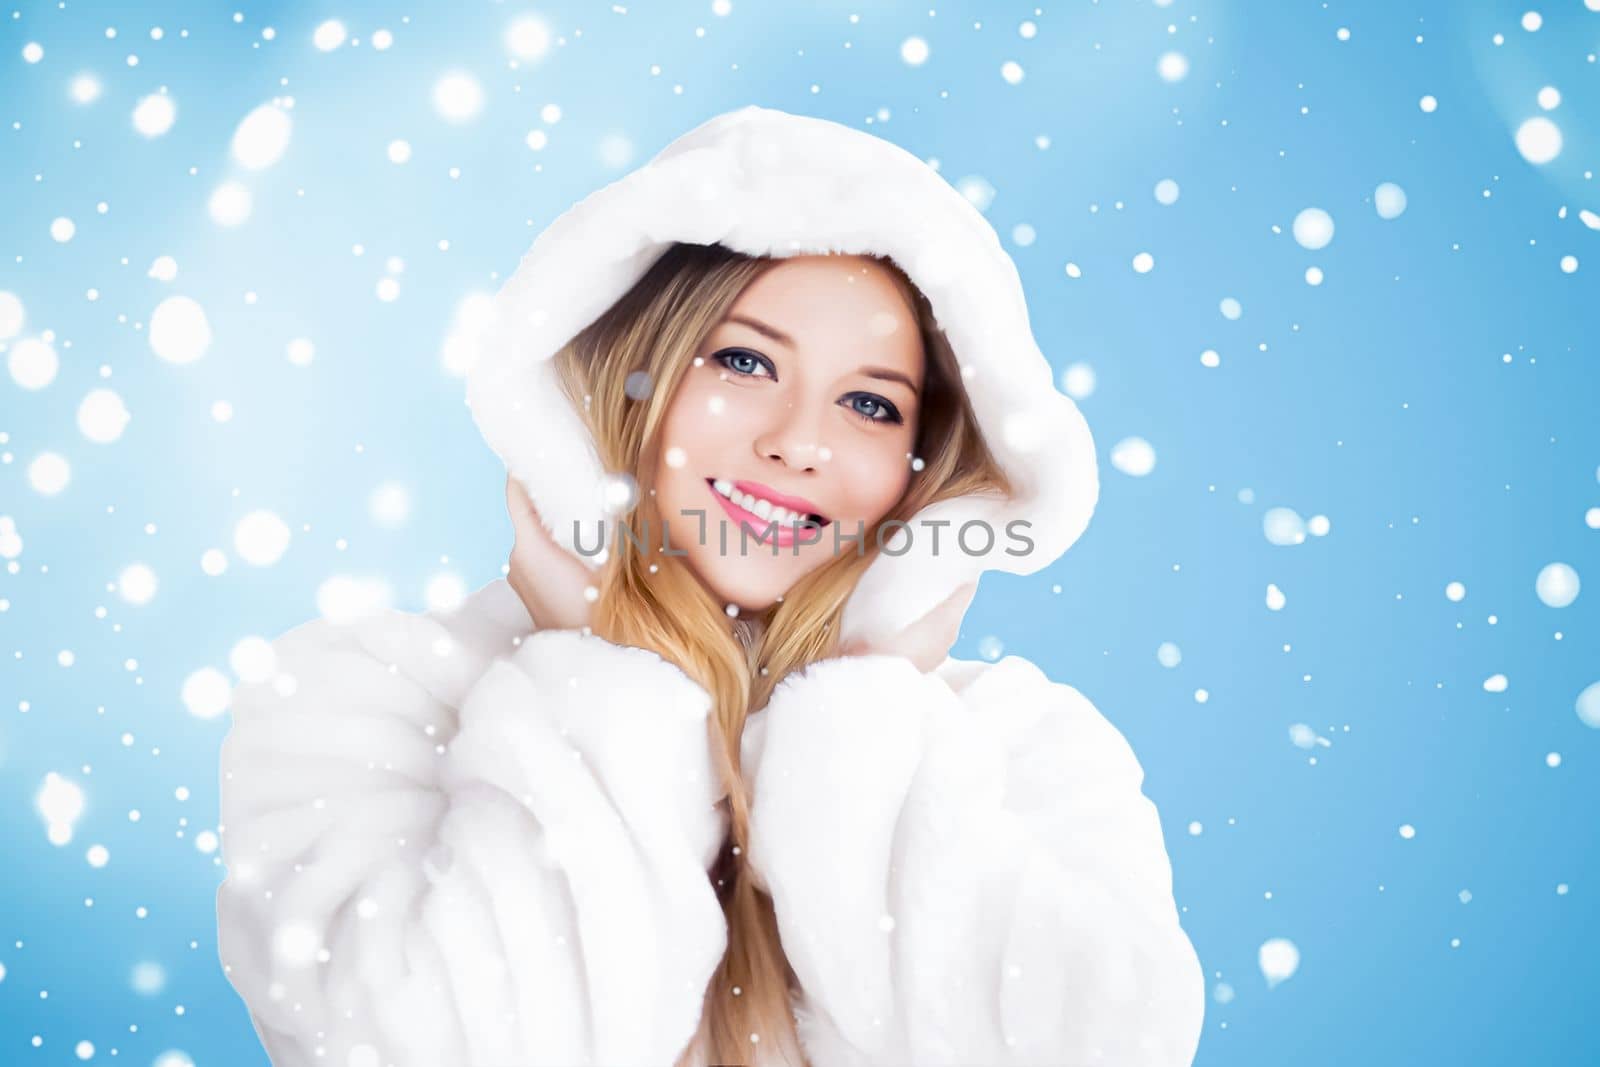 Happy holidays, beauty and winter fashion, beautiful woman wearing white fluffy fur coat, snowing snow on blue background as Christmas, New Year and holiday lifestyle portrait style